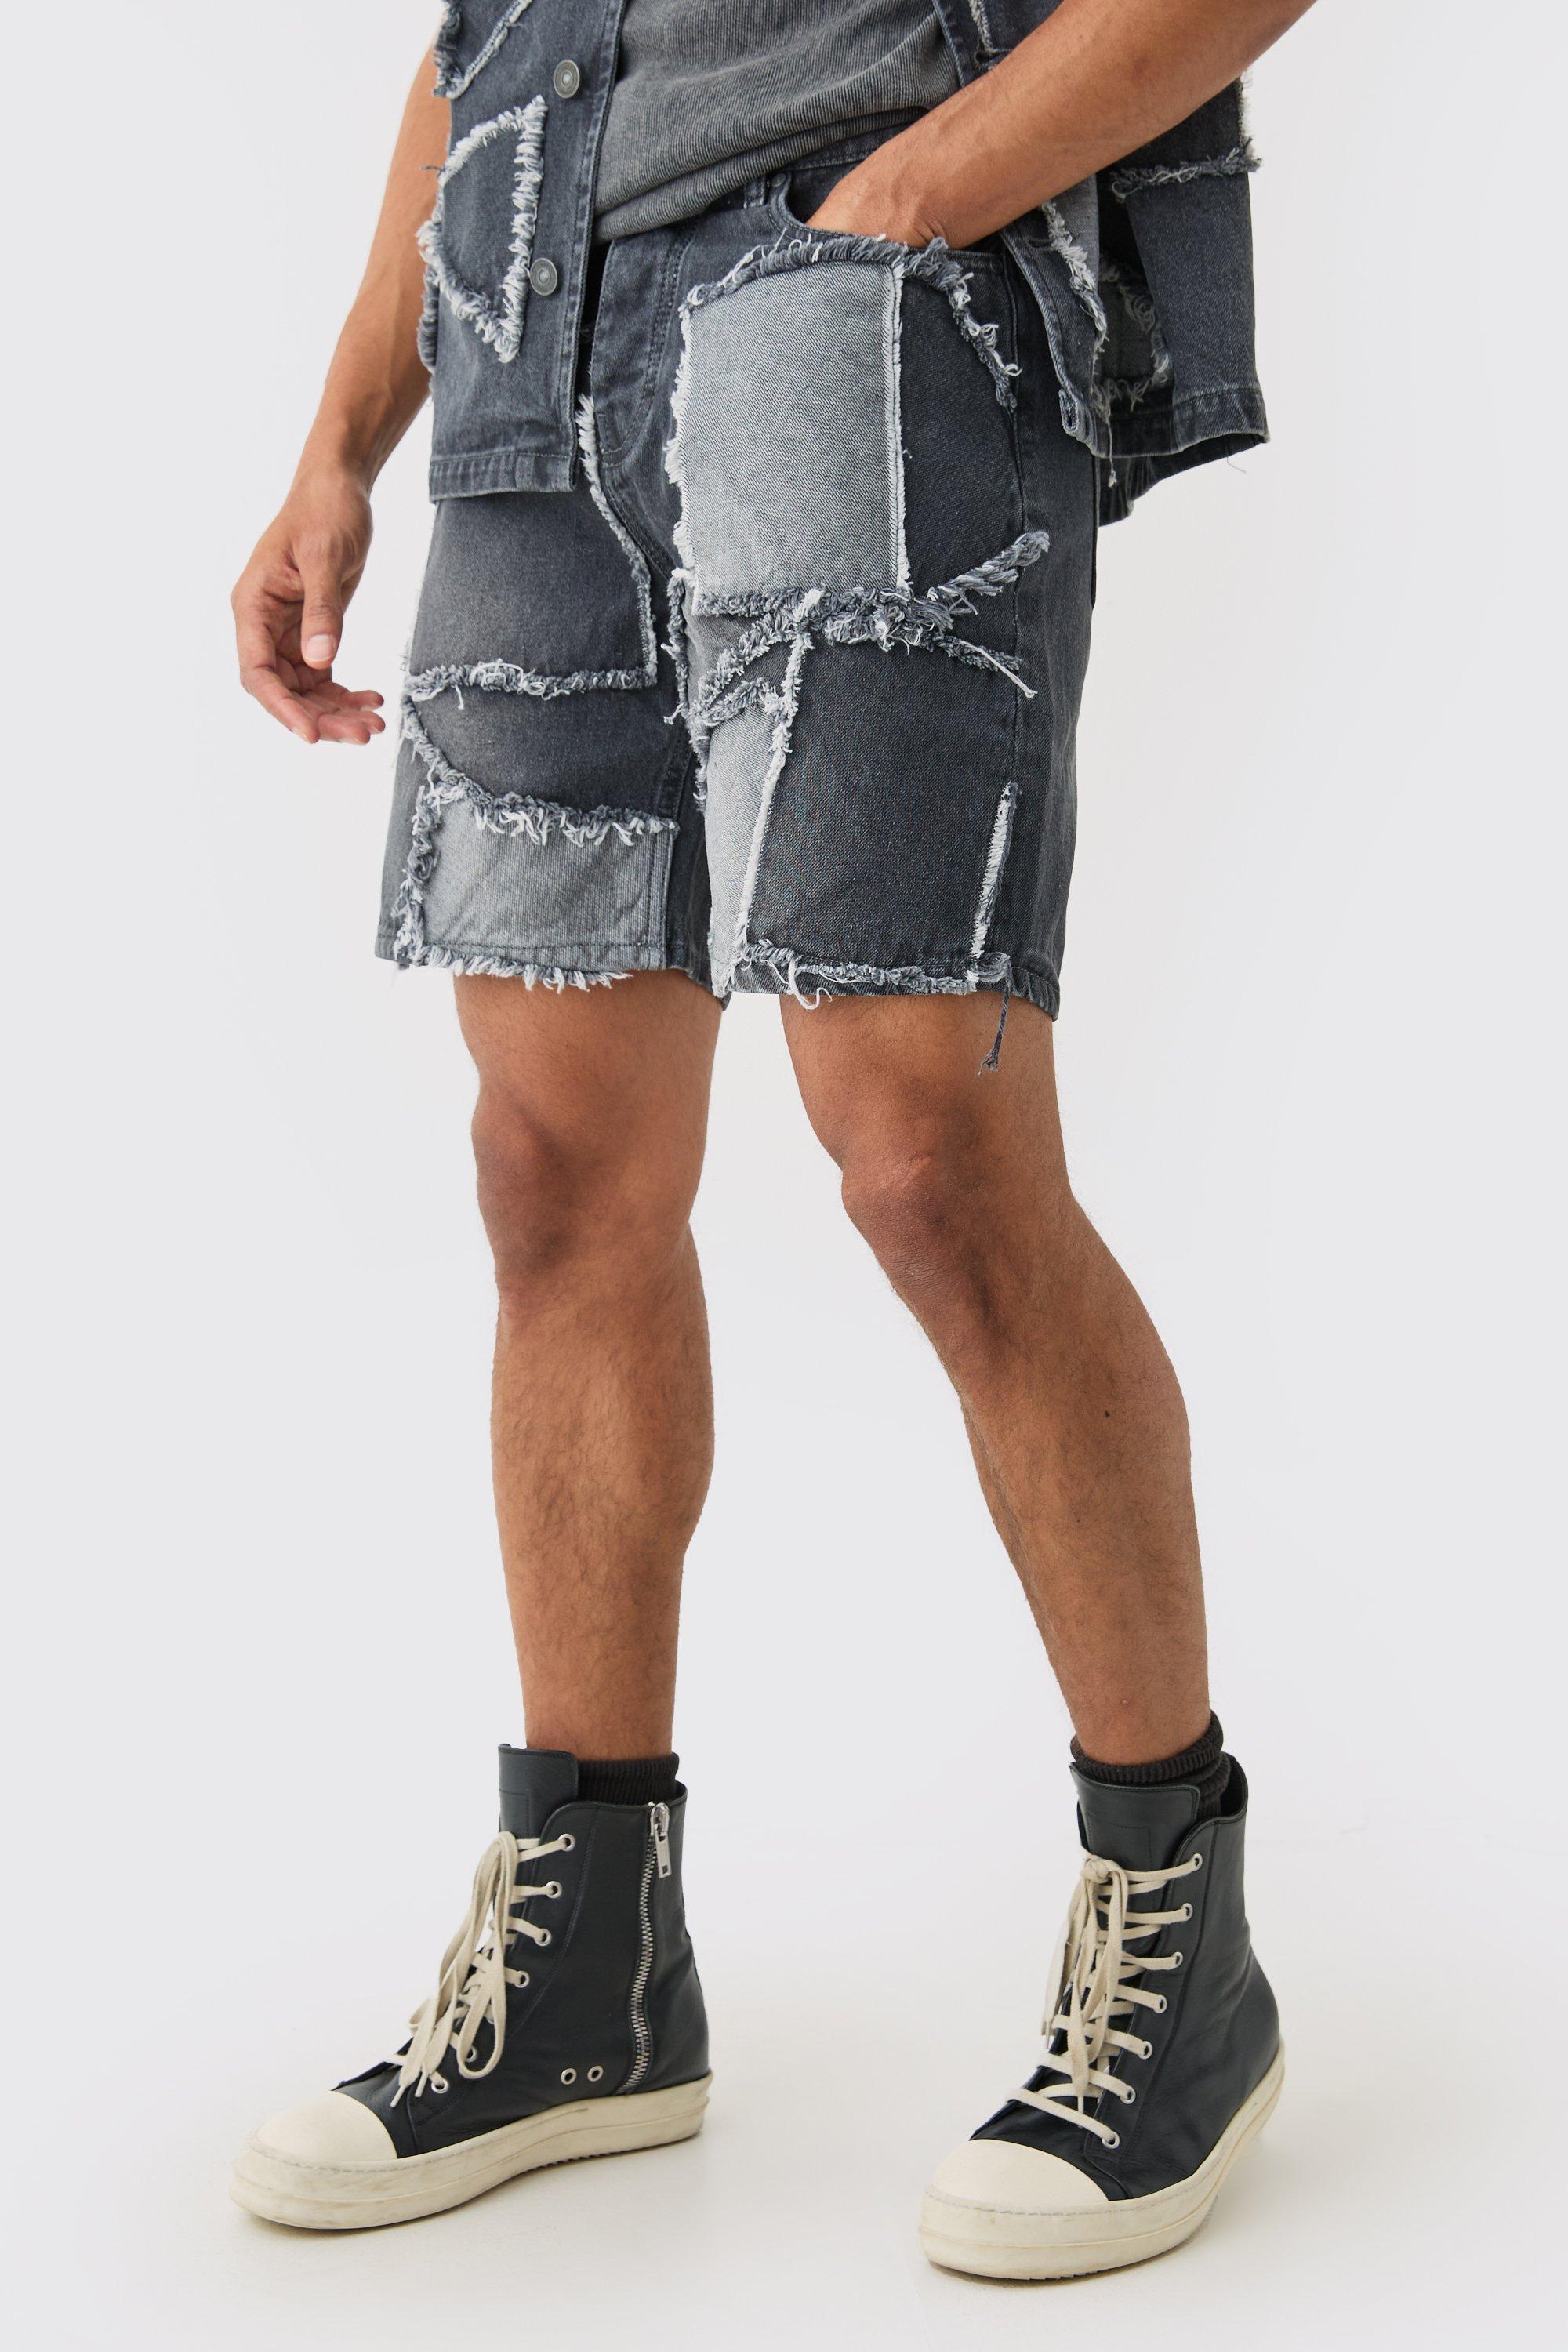 Image of Distressed Patchwork Relaxed Denim Short In Charcoal, Grigio